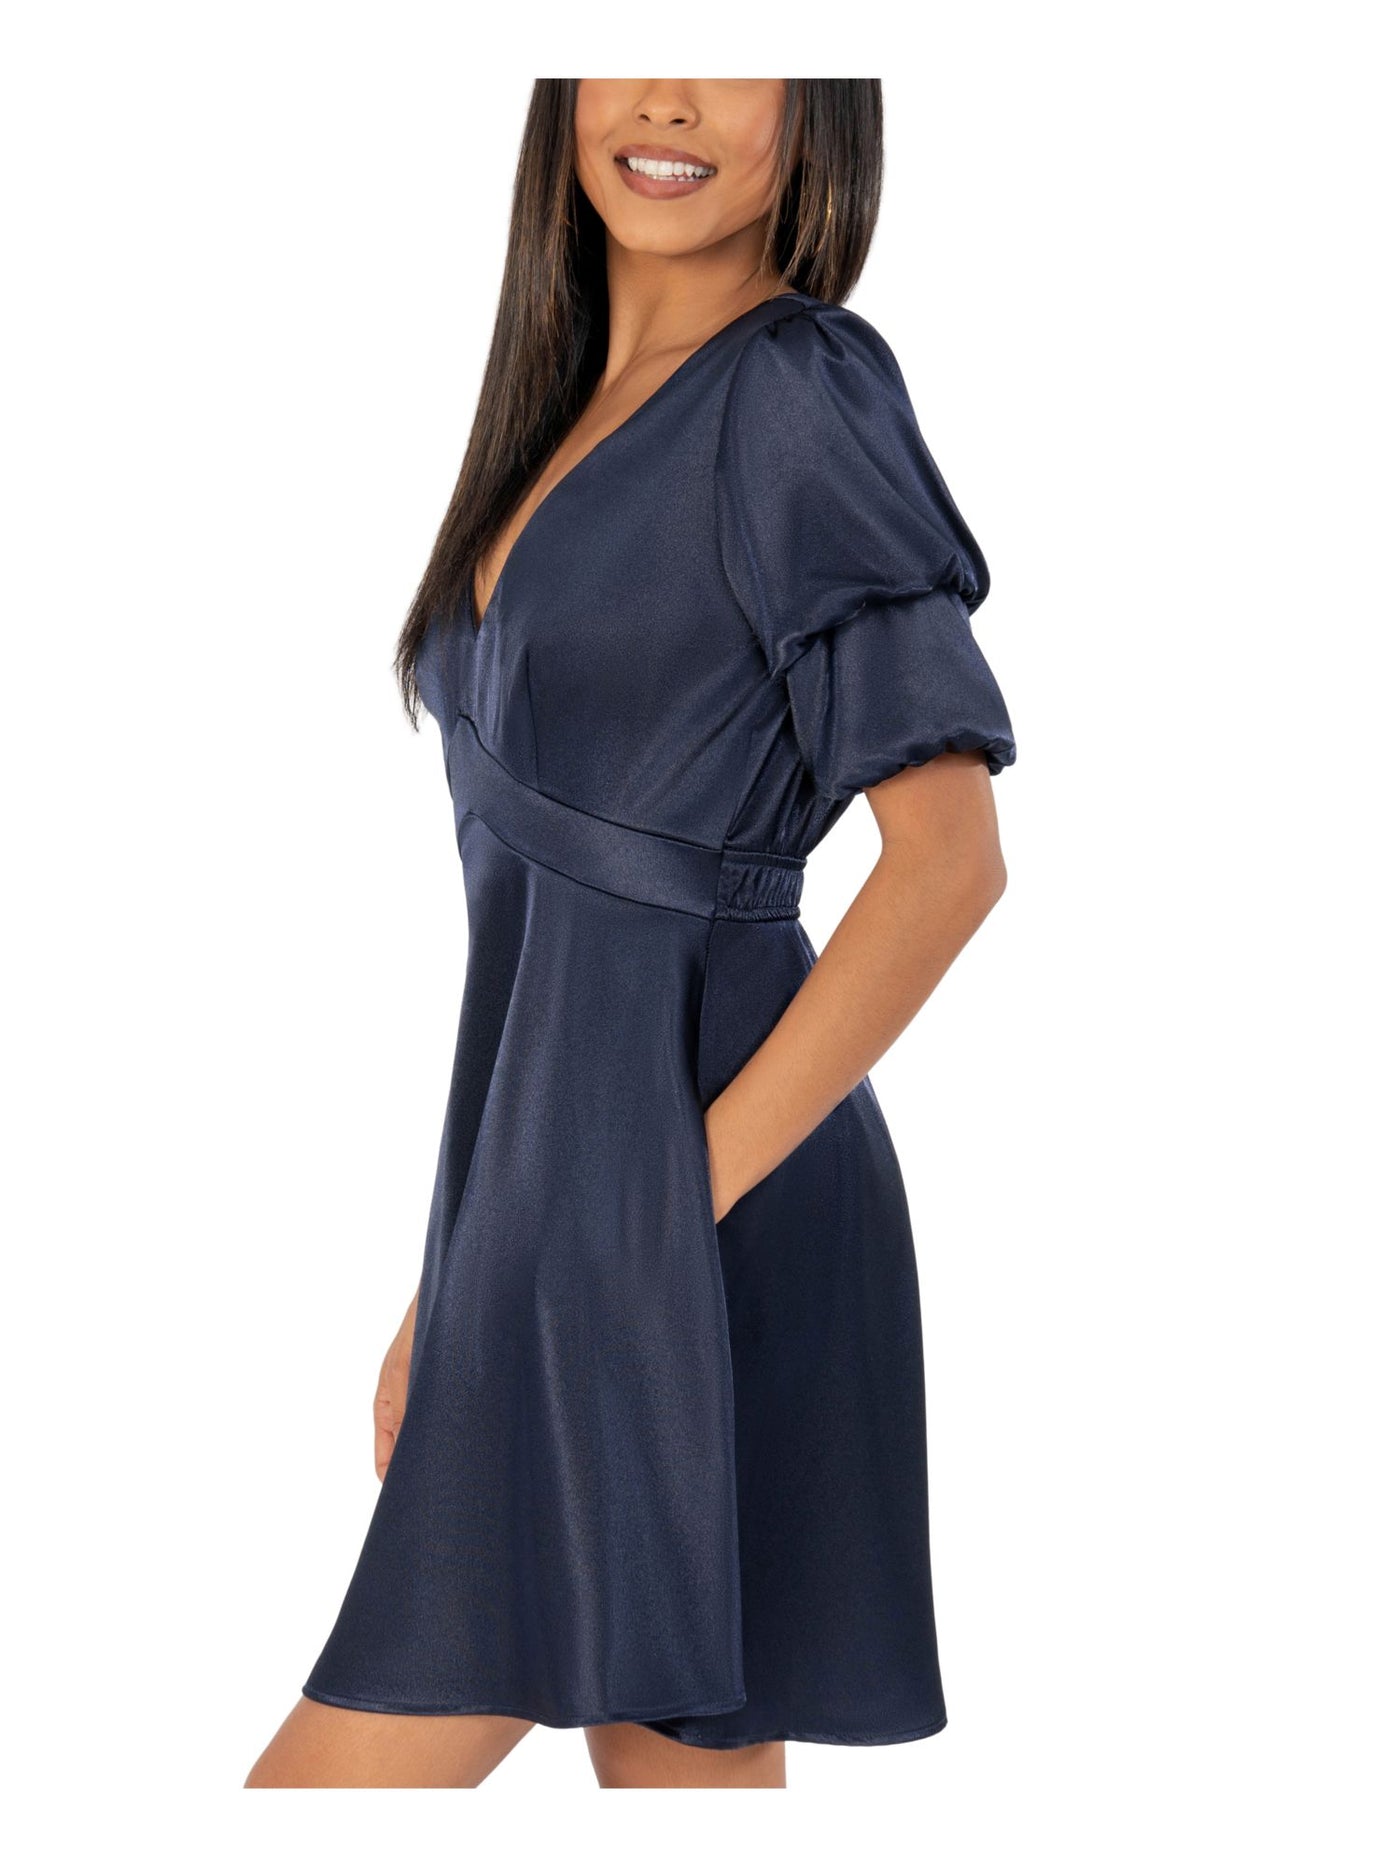 SPEECHLESS Womens Navy Pocketed Darted Satin Short Sleeve V Neck Short Party Fit + Flare Dress Juniors 5